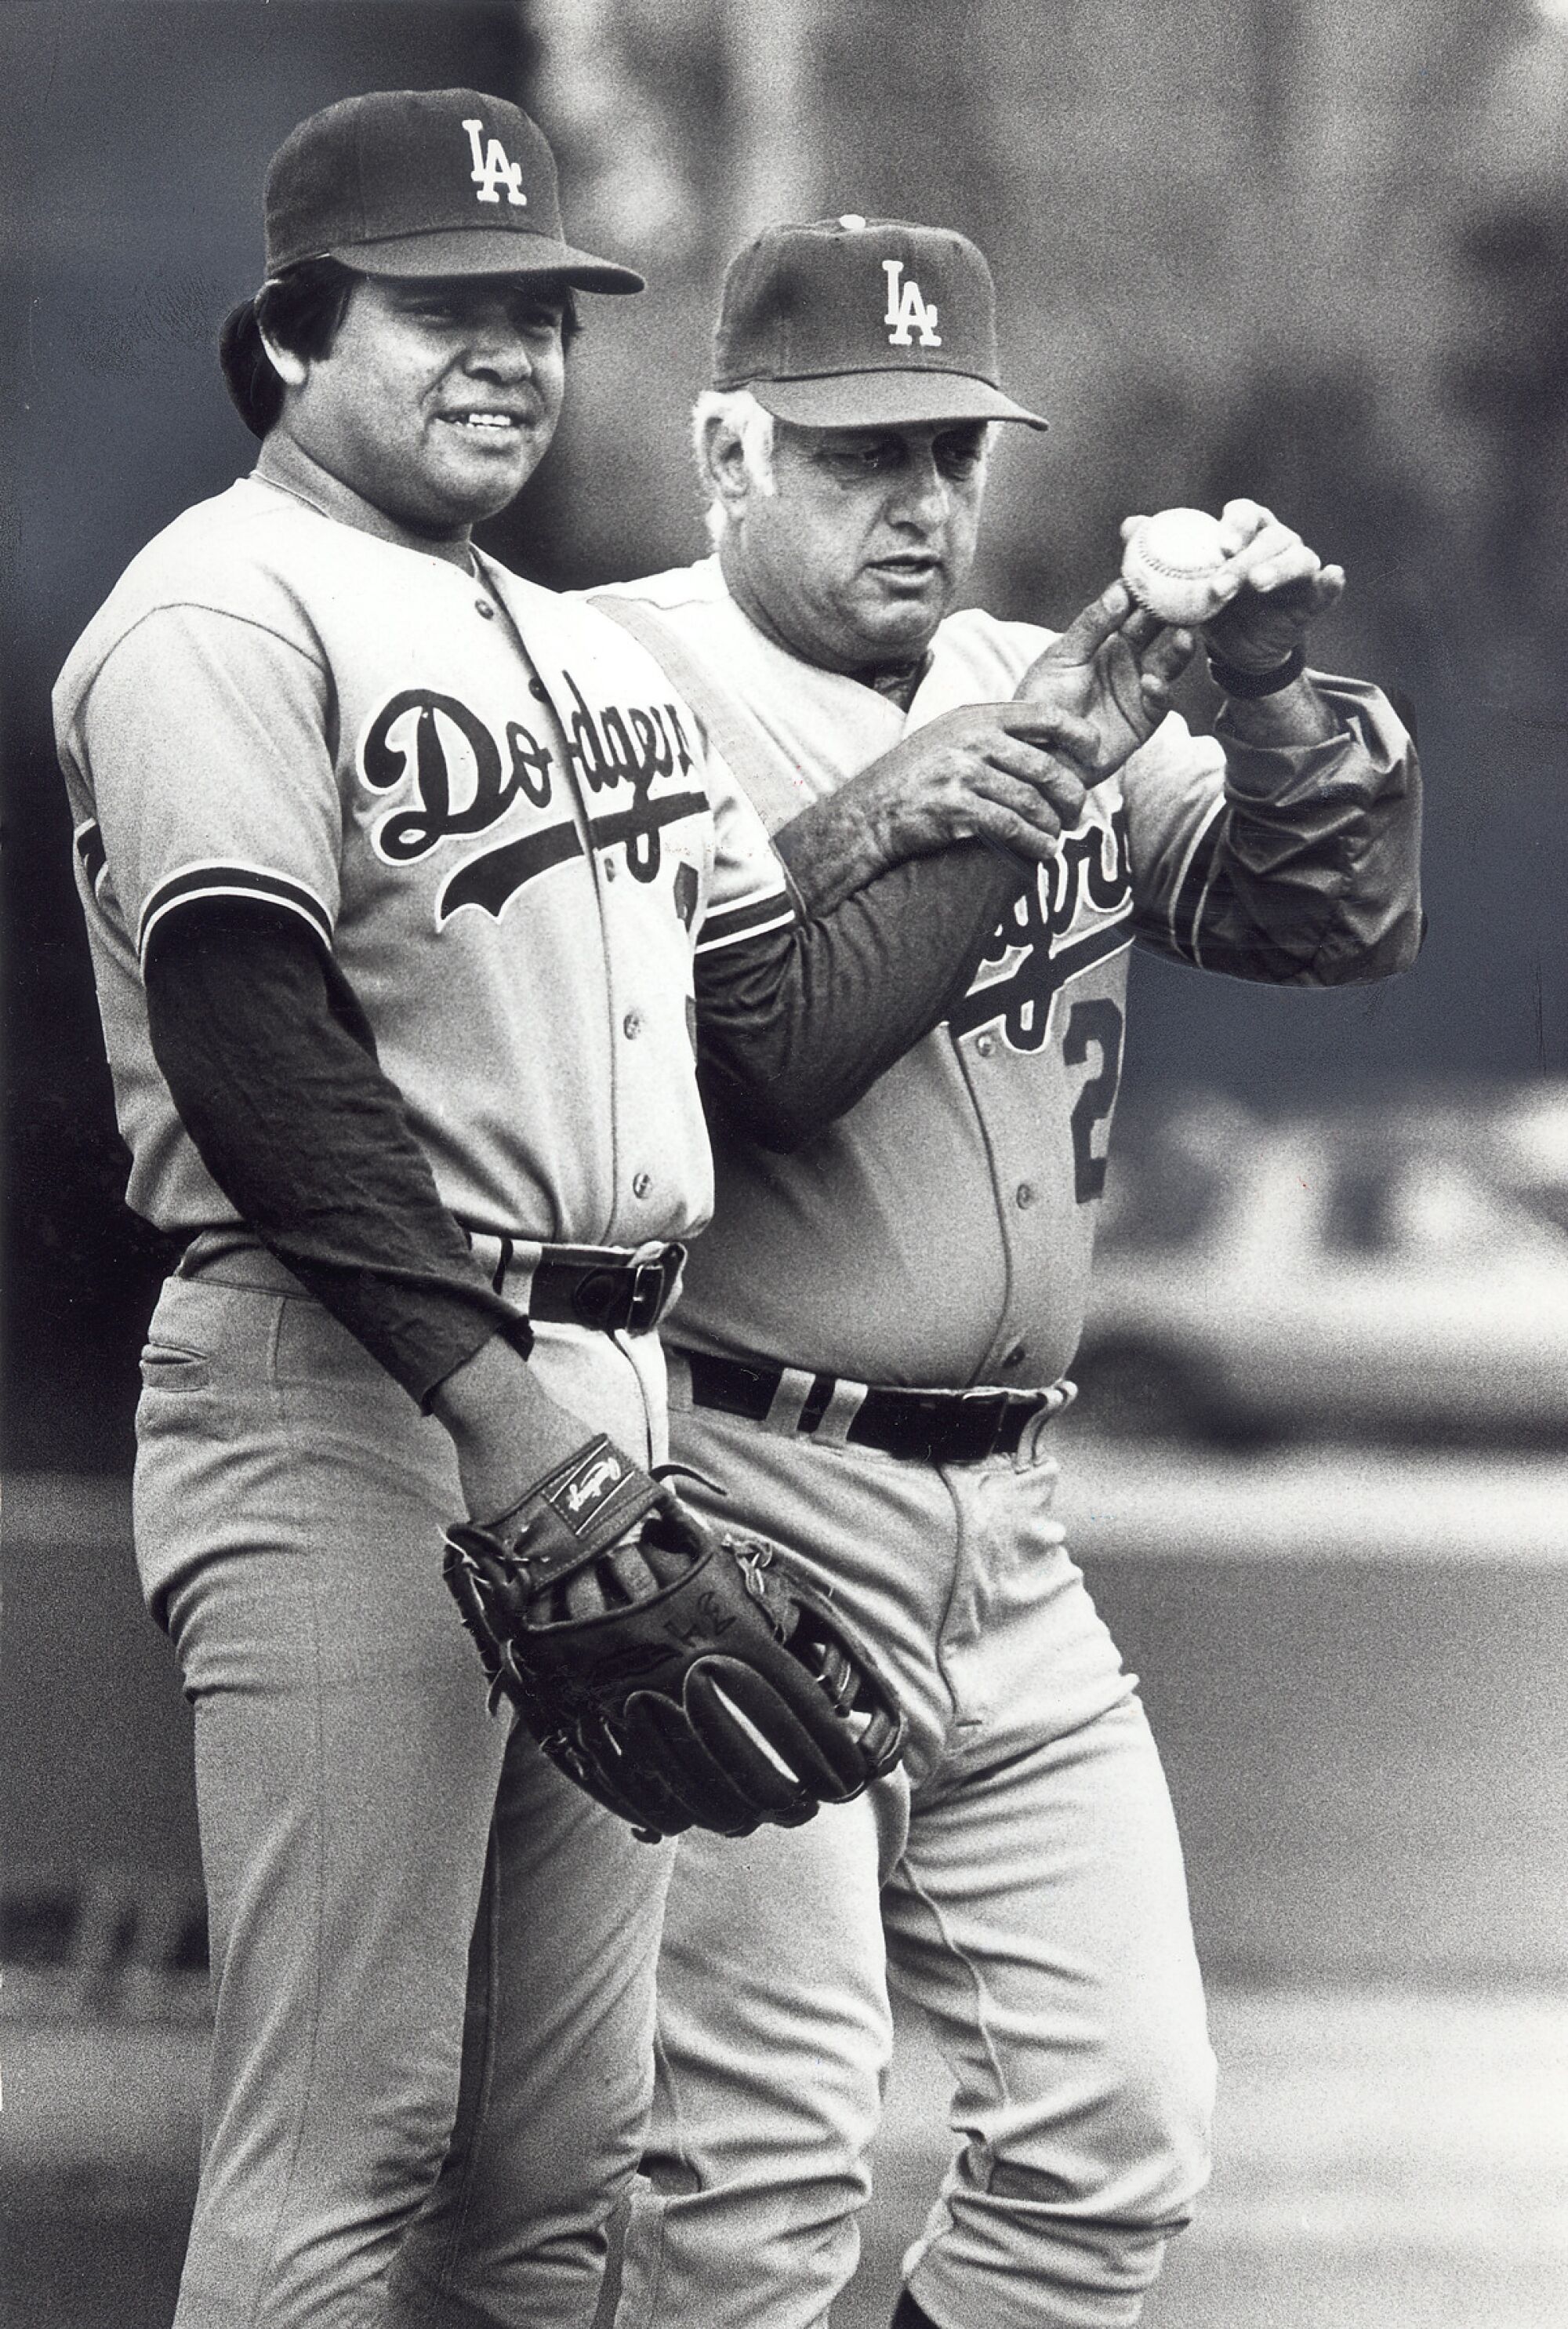 Tommy Lasorda jokingly shows pitcher Fernando Valenzuela how to hold a baseball in March 1983.